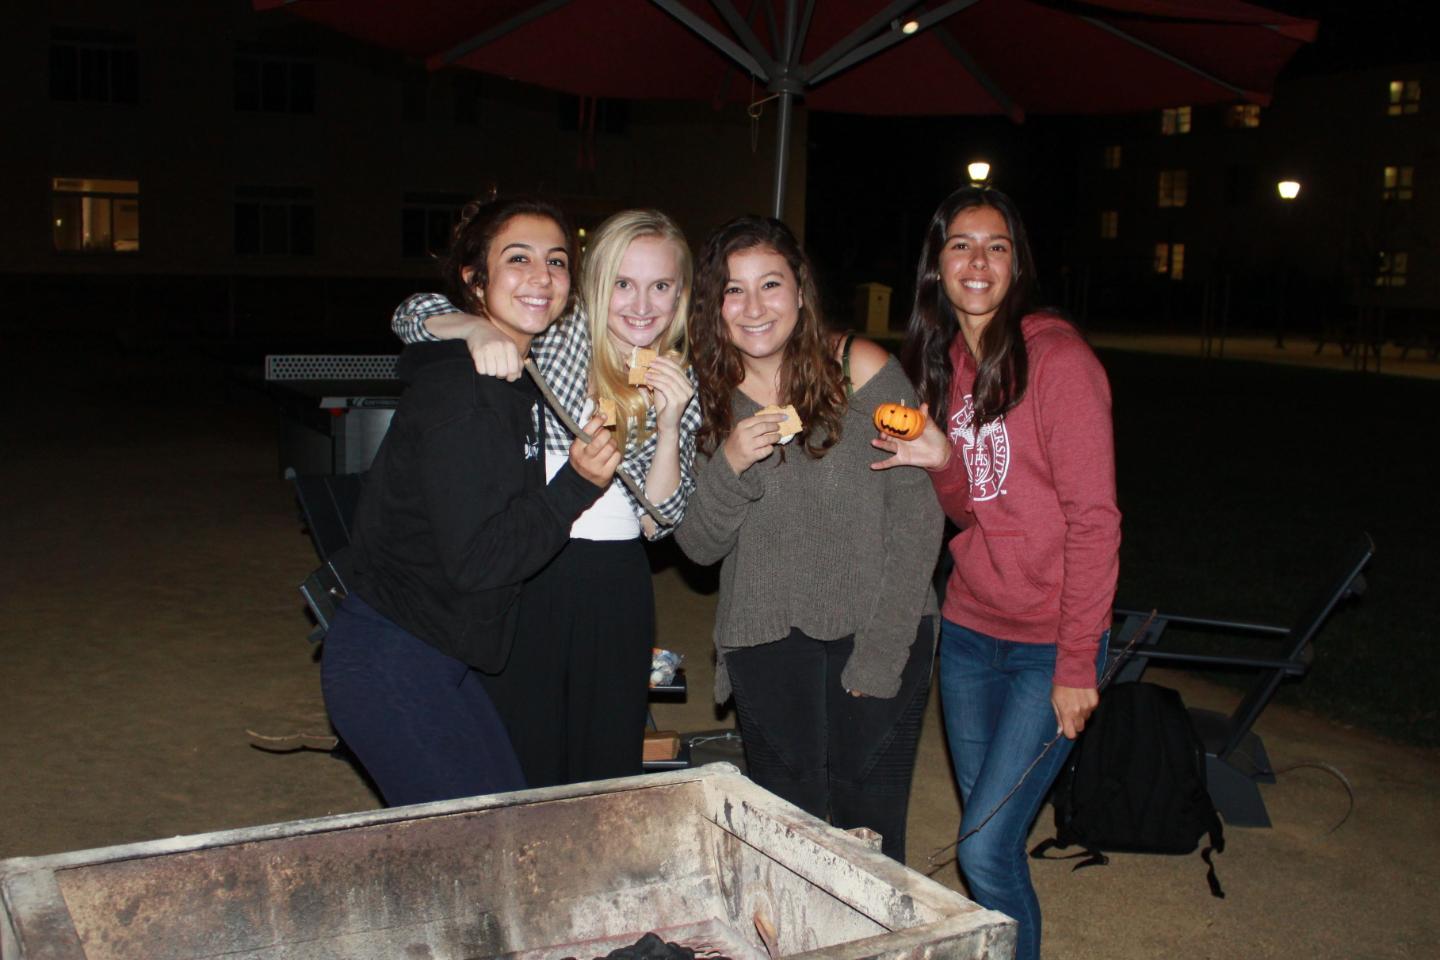 Four students smile holding smores outside at night